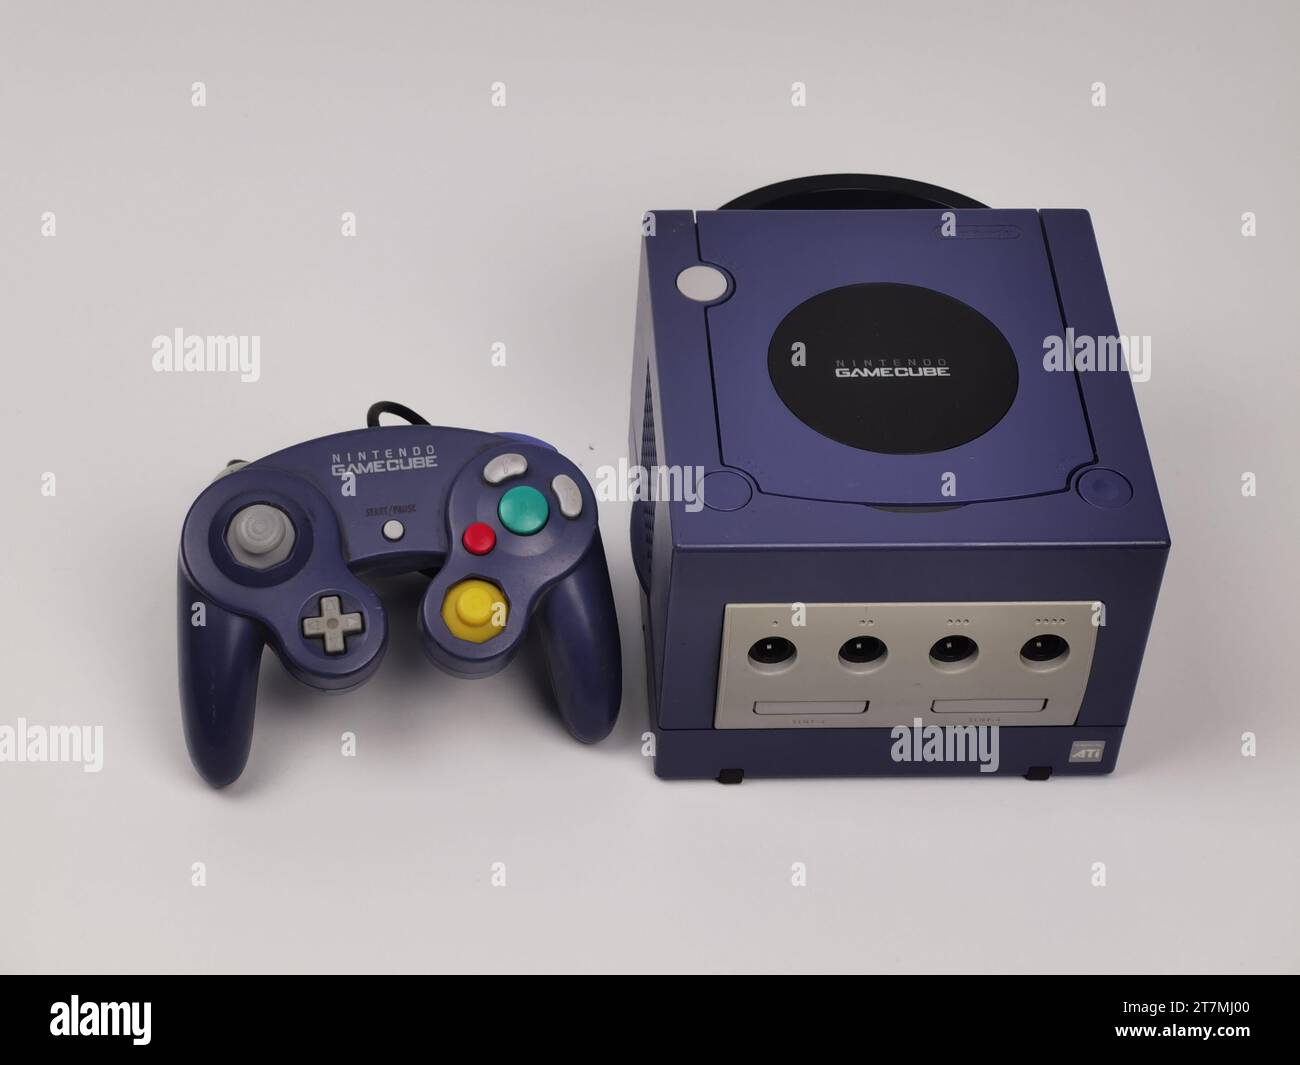 A Purple Nintendo GameCube console with a purple joypad on a white background. Stock Photo